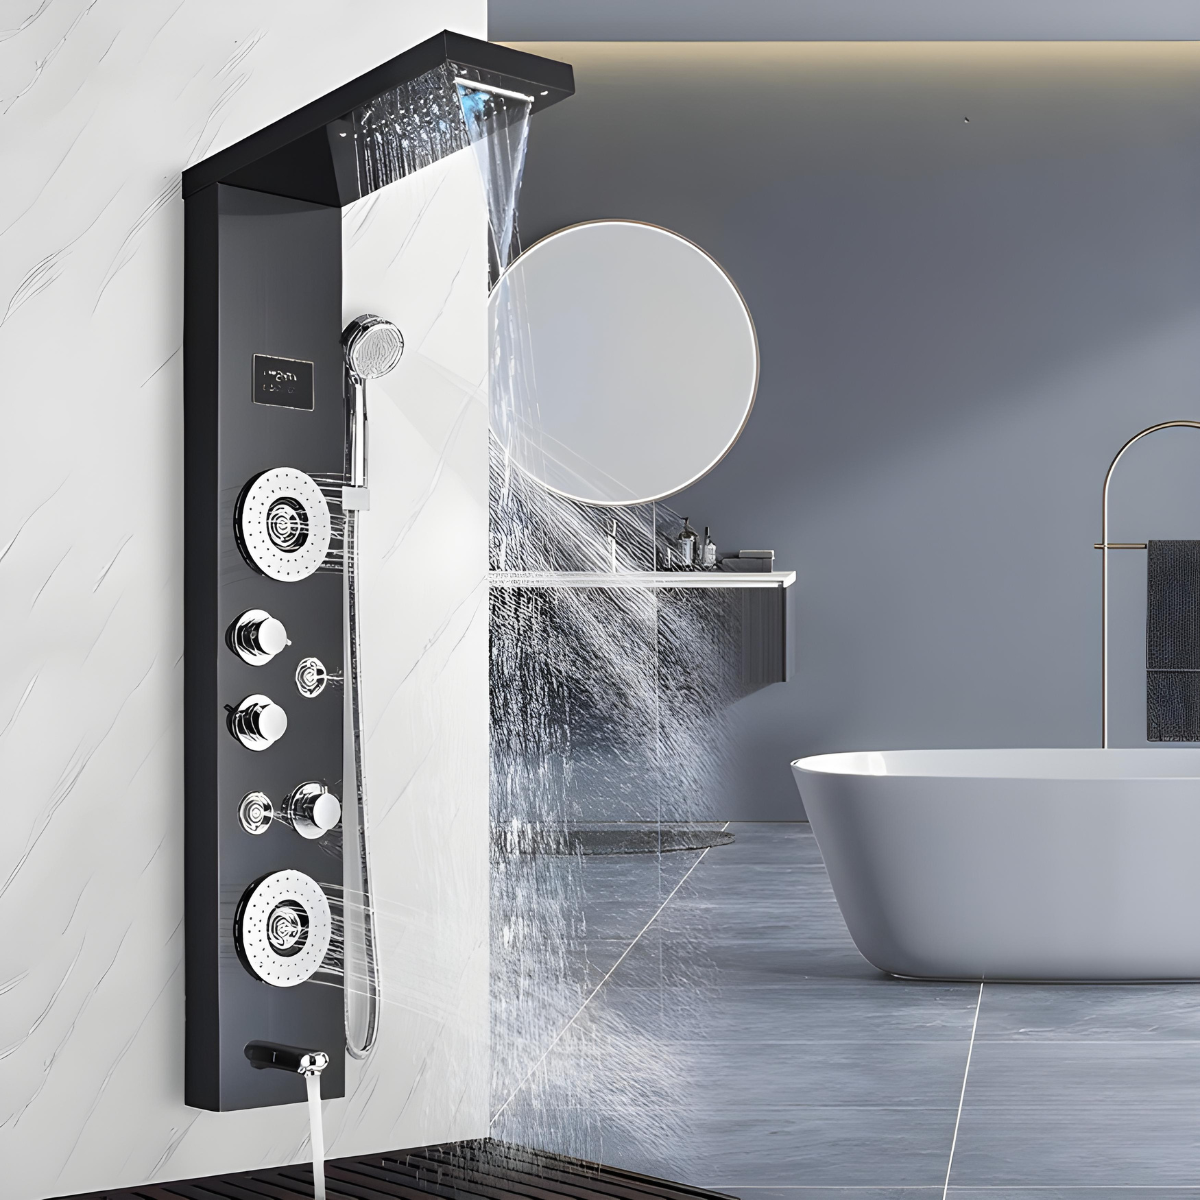 Shower Panel Tower System, 5 in 1 Stainless Steel LED Shower Column, Rainfall & Waterfall Head, Massage Jets Spa Pallazi